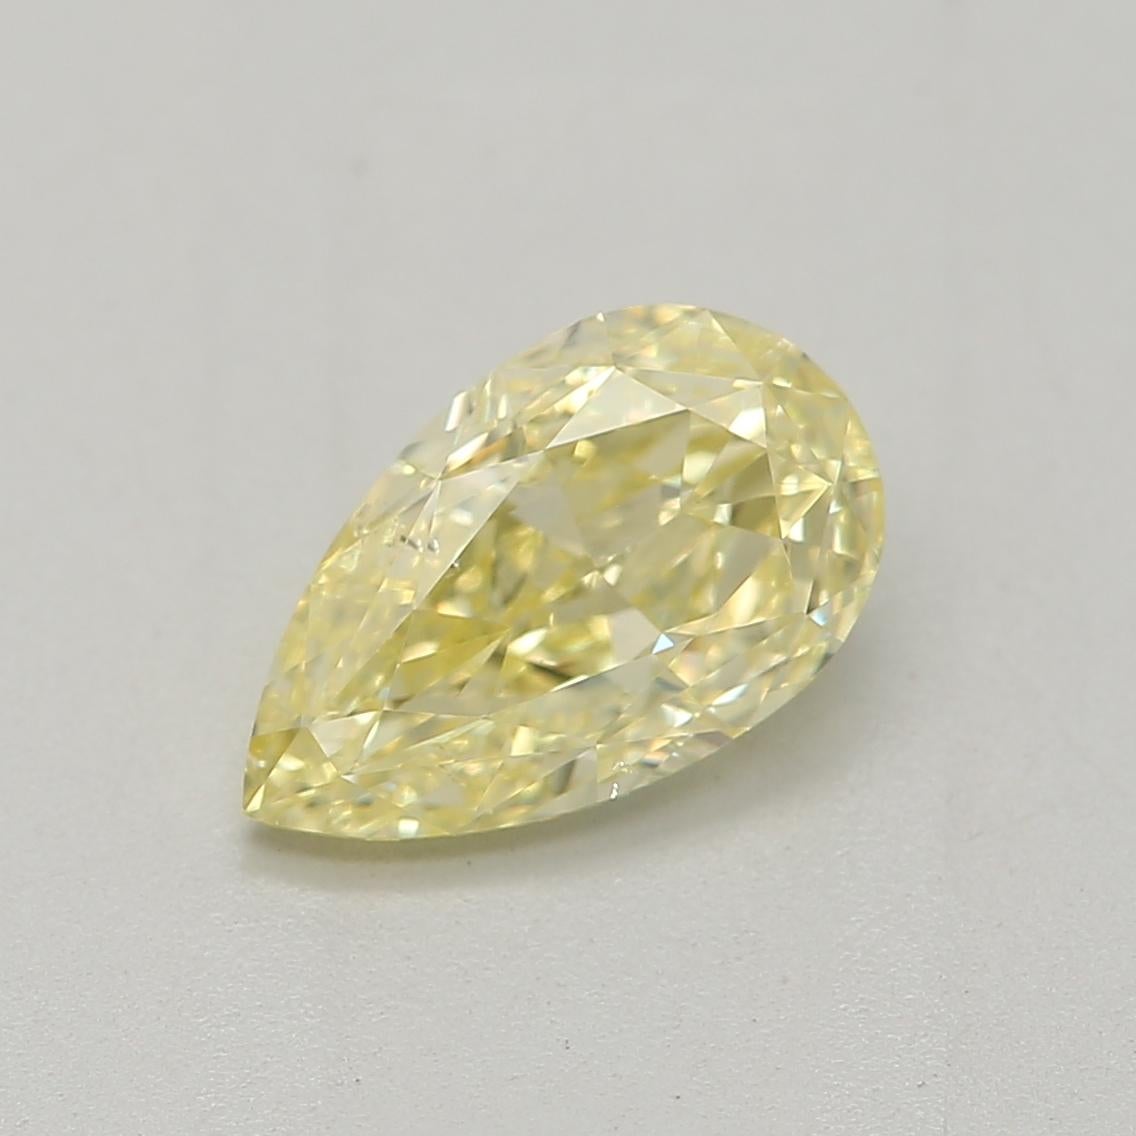 *100% NATURAL FANCY COLOUR DIAMOND*

✪ Diamond Details ✪

➛ Shape: Pear
➛ Colour Grade: Fancy Yellow
➛ Carat: 0.71
➛ Clarity: Si1
➛ GIA  Certified 

^FEATURES OF THE DIAMOND^

✪ Our Specialty ✪

➛ We can definitely work on your special custom